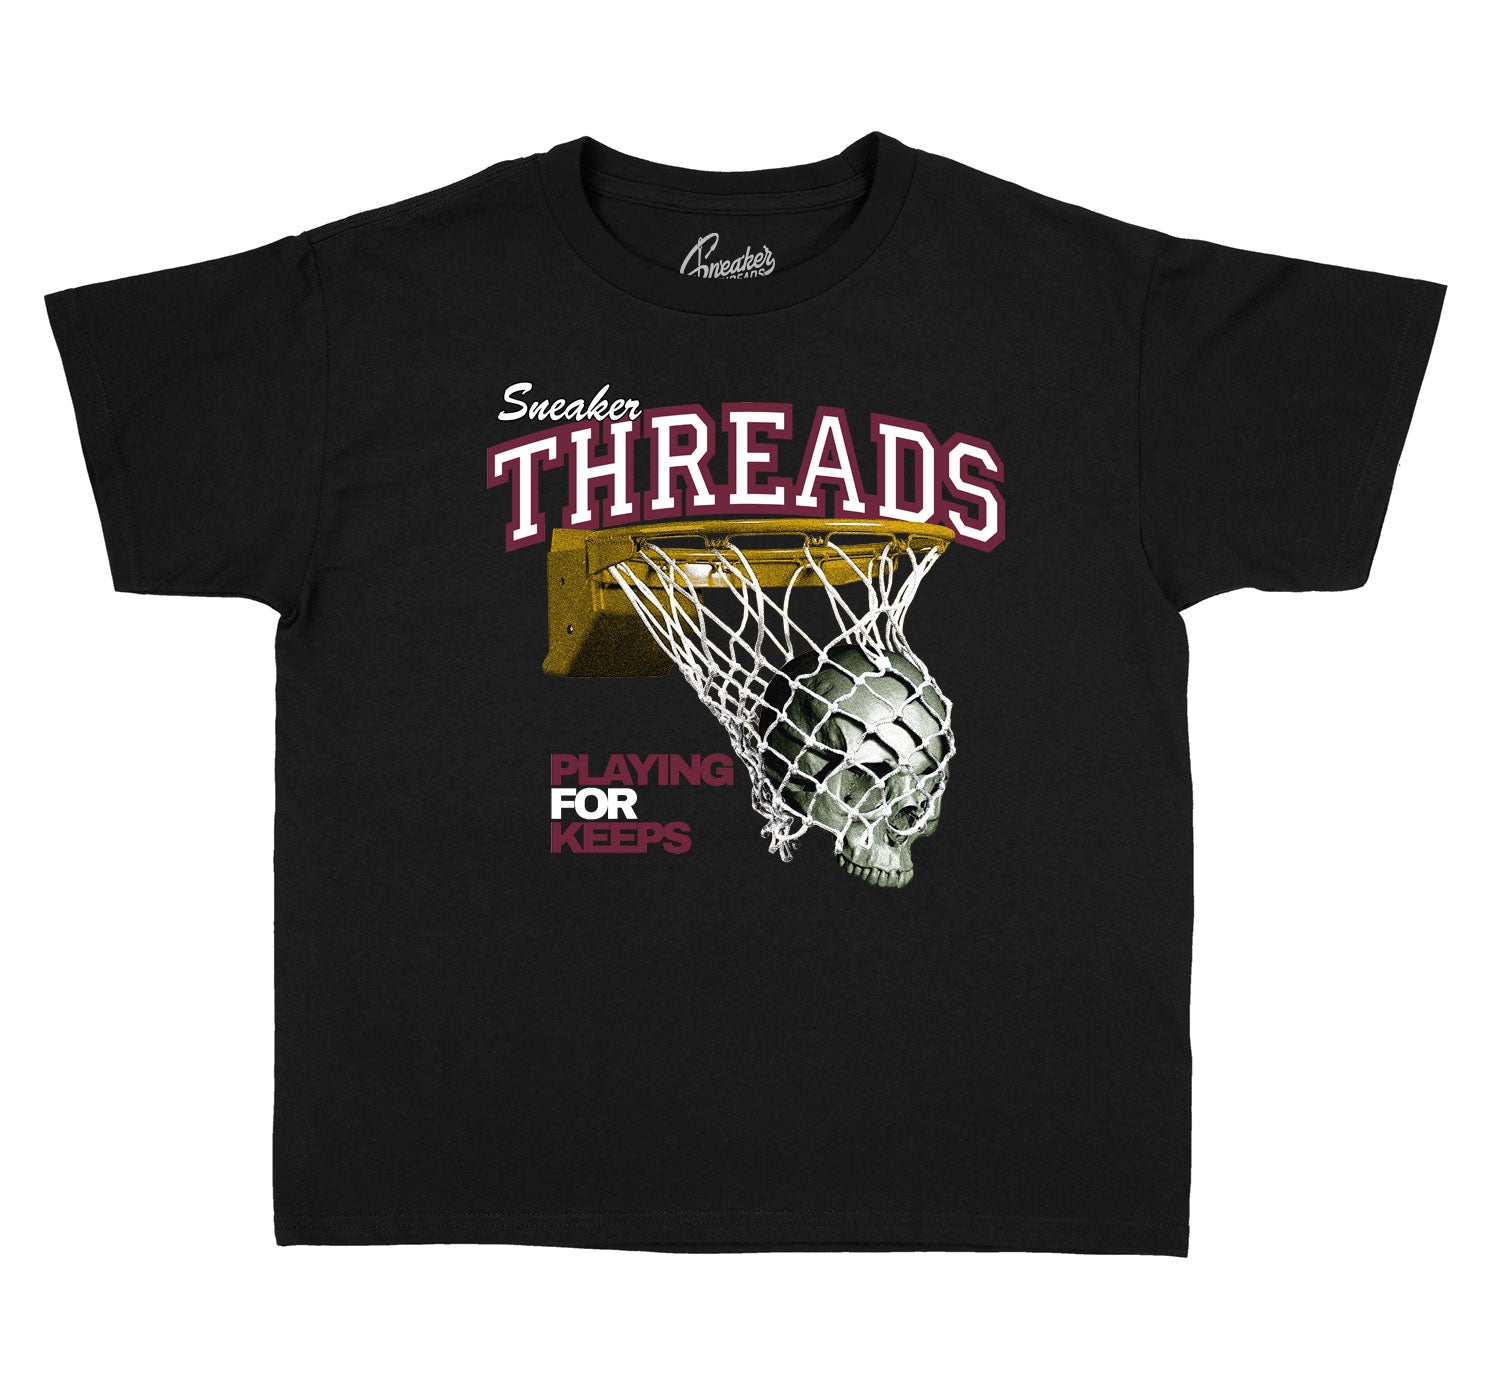 Kids Bordeaux 6 Shirt - Playing For Keeps - Black